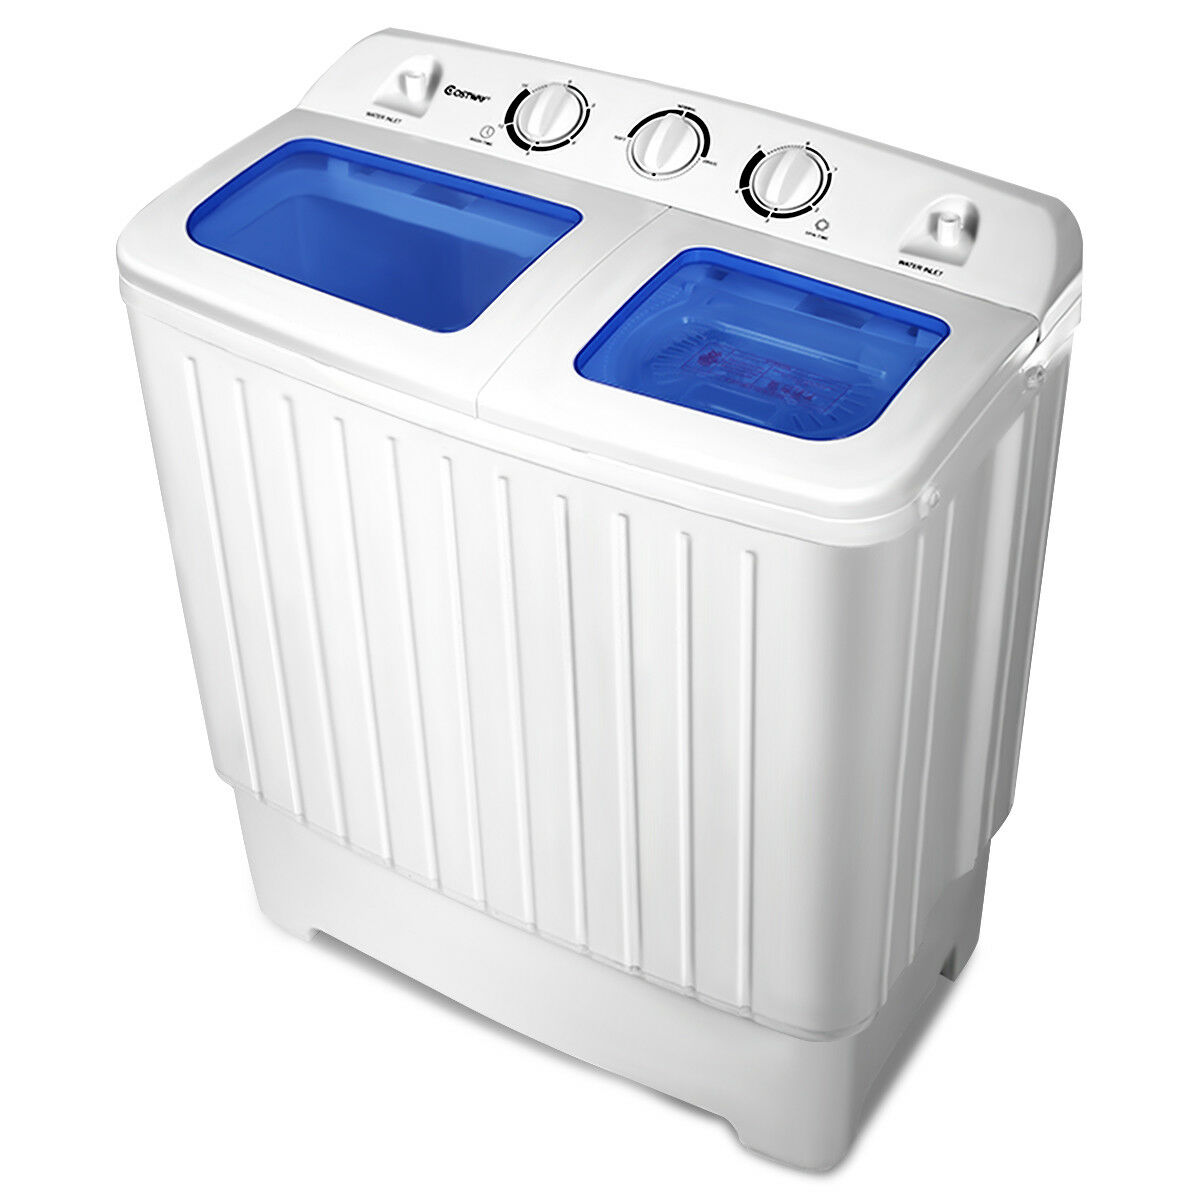 Costway 17.6lb Portable Mini Compact Twin Tub  Washing Machine Washer Spin Dryer - image 2 of 9